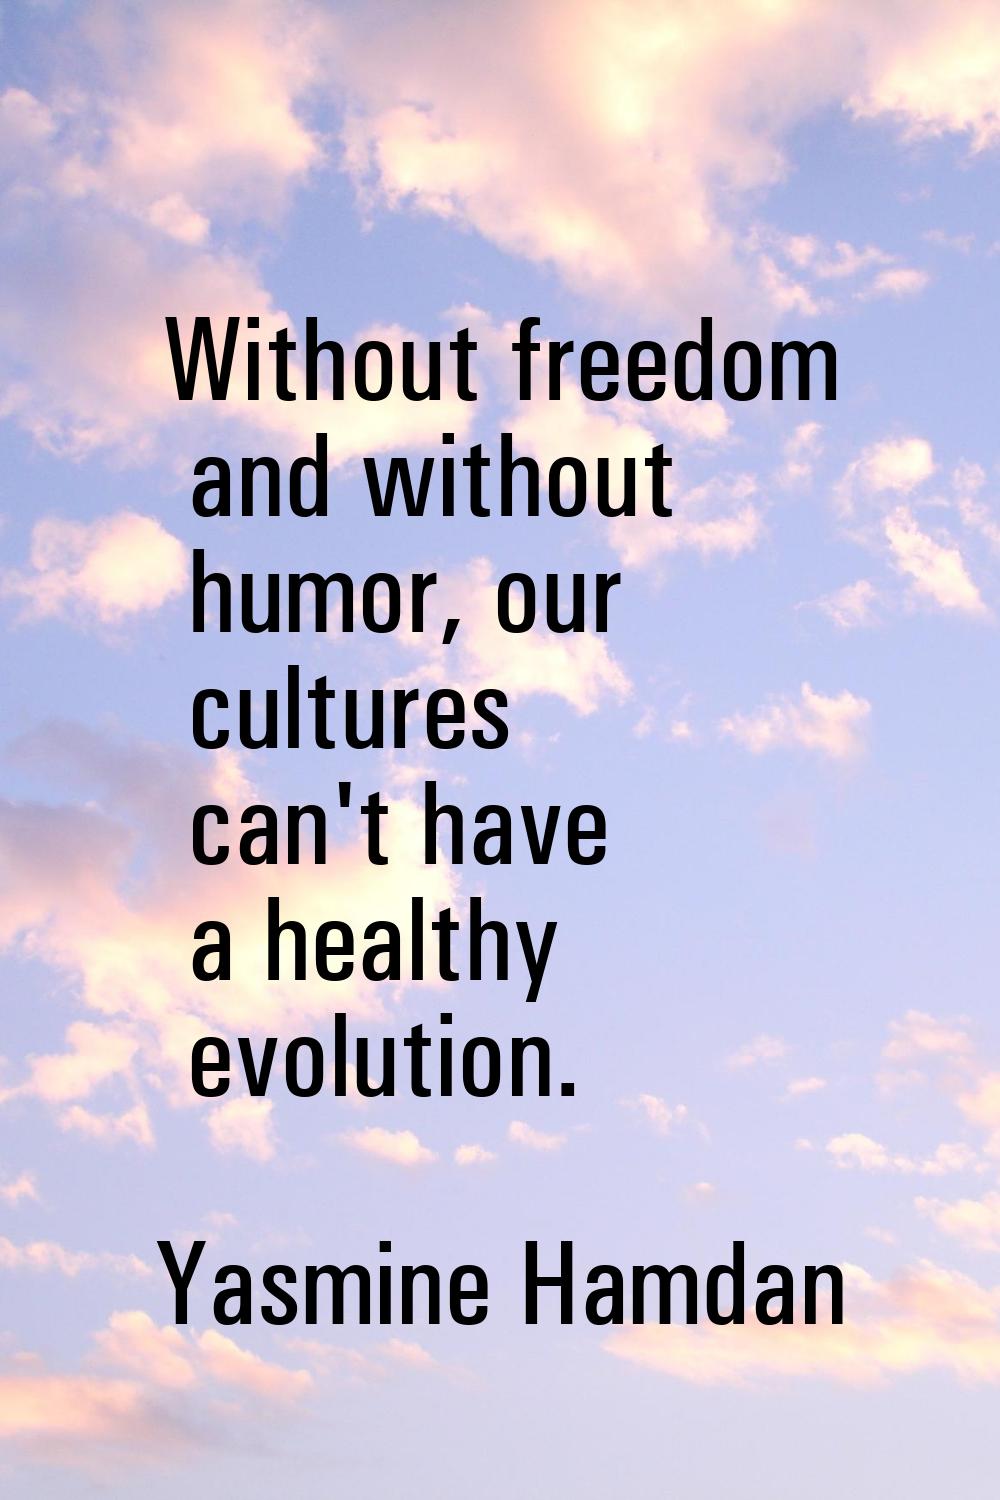 Without freedom and without humor, our cultures can't have a healthy evolution.